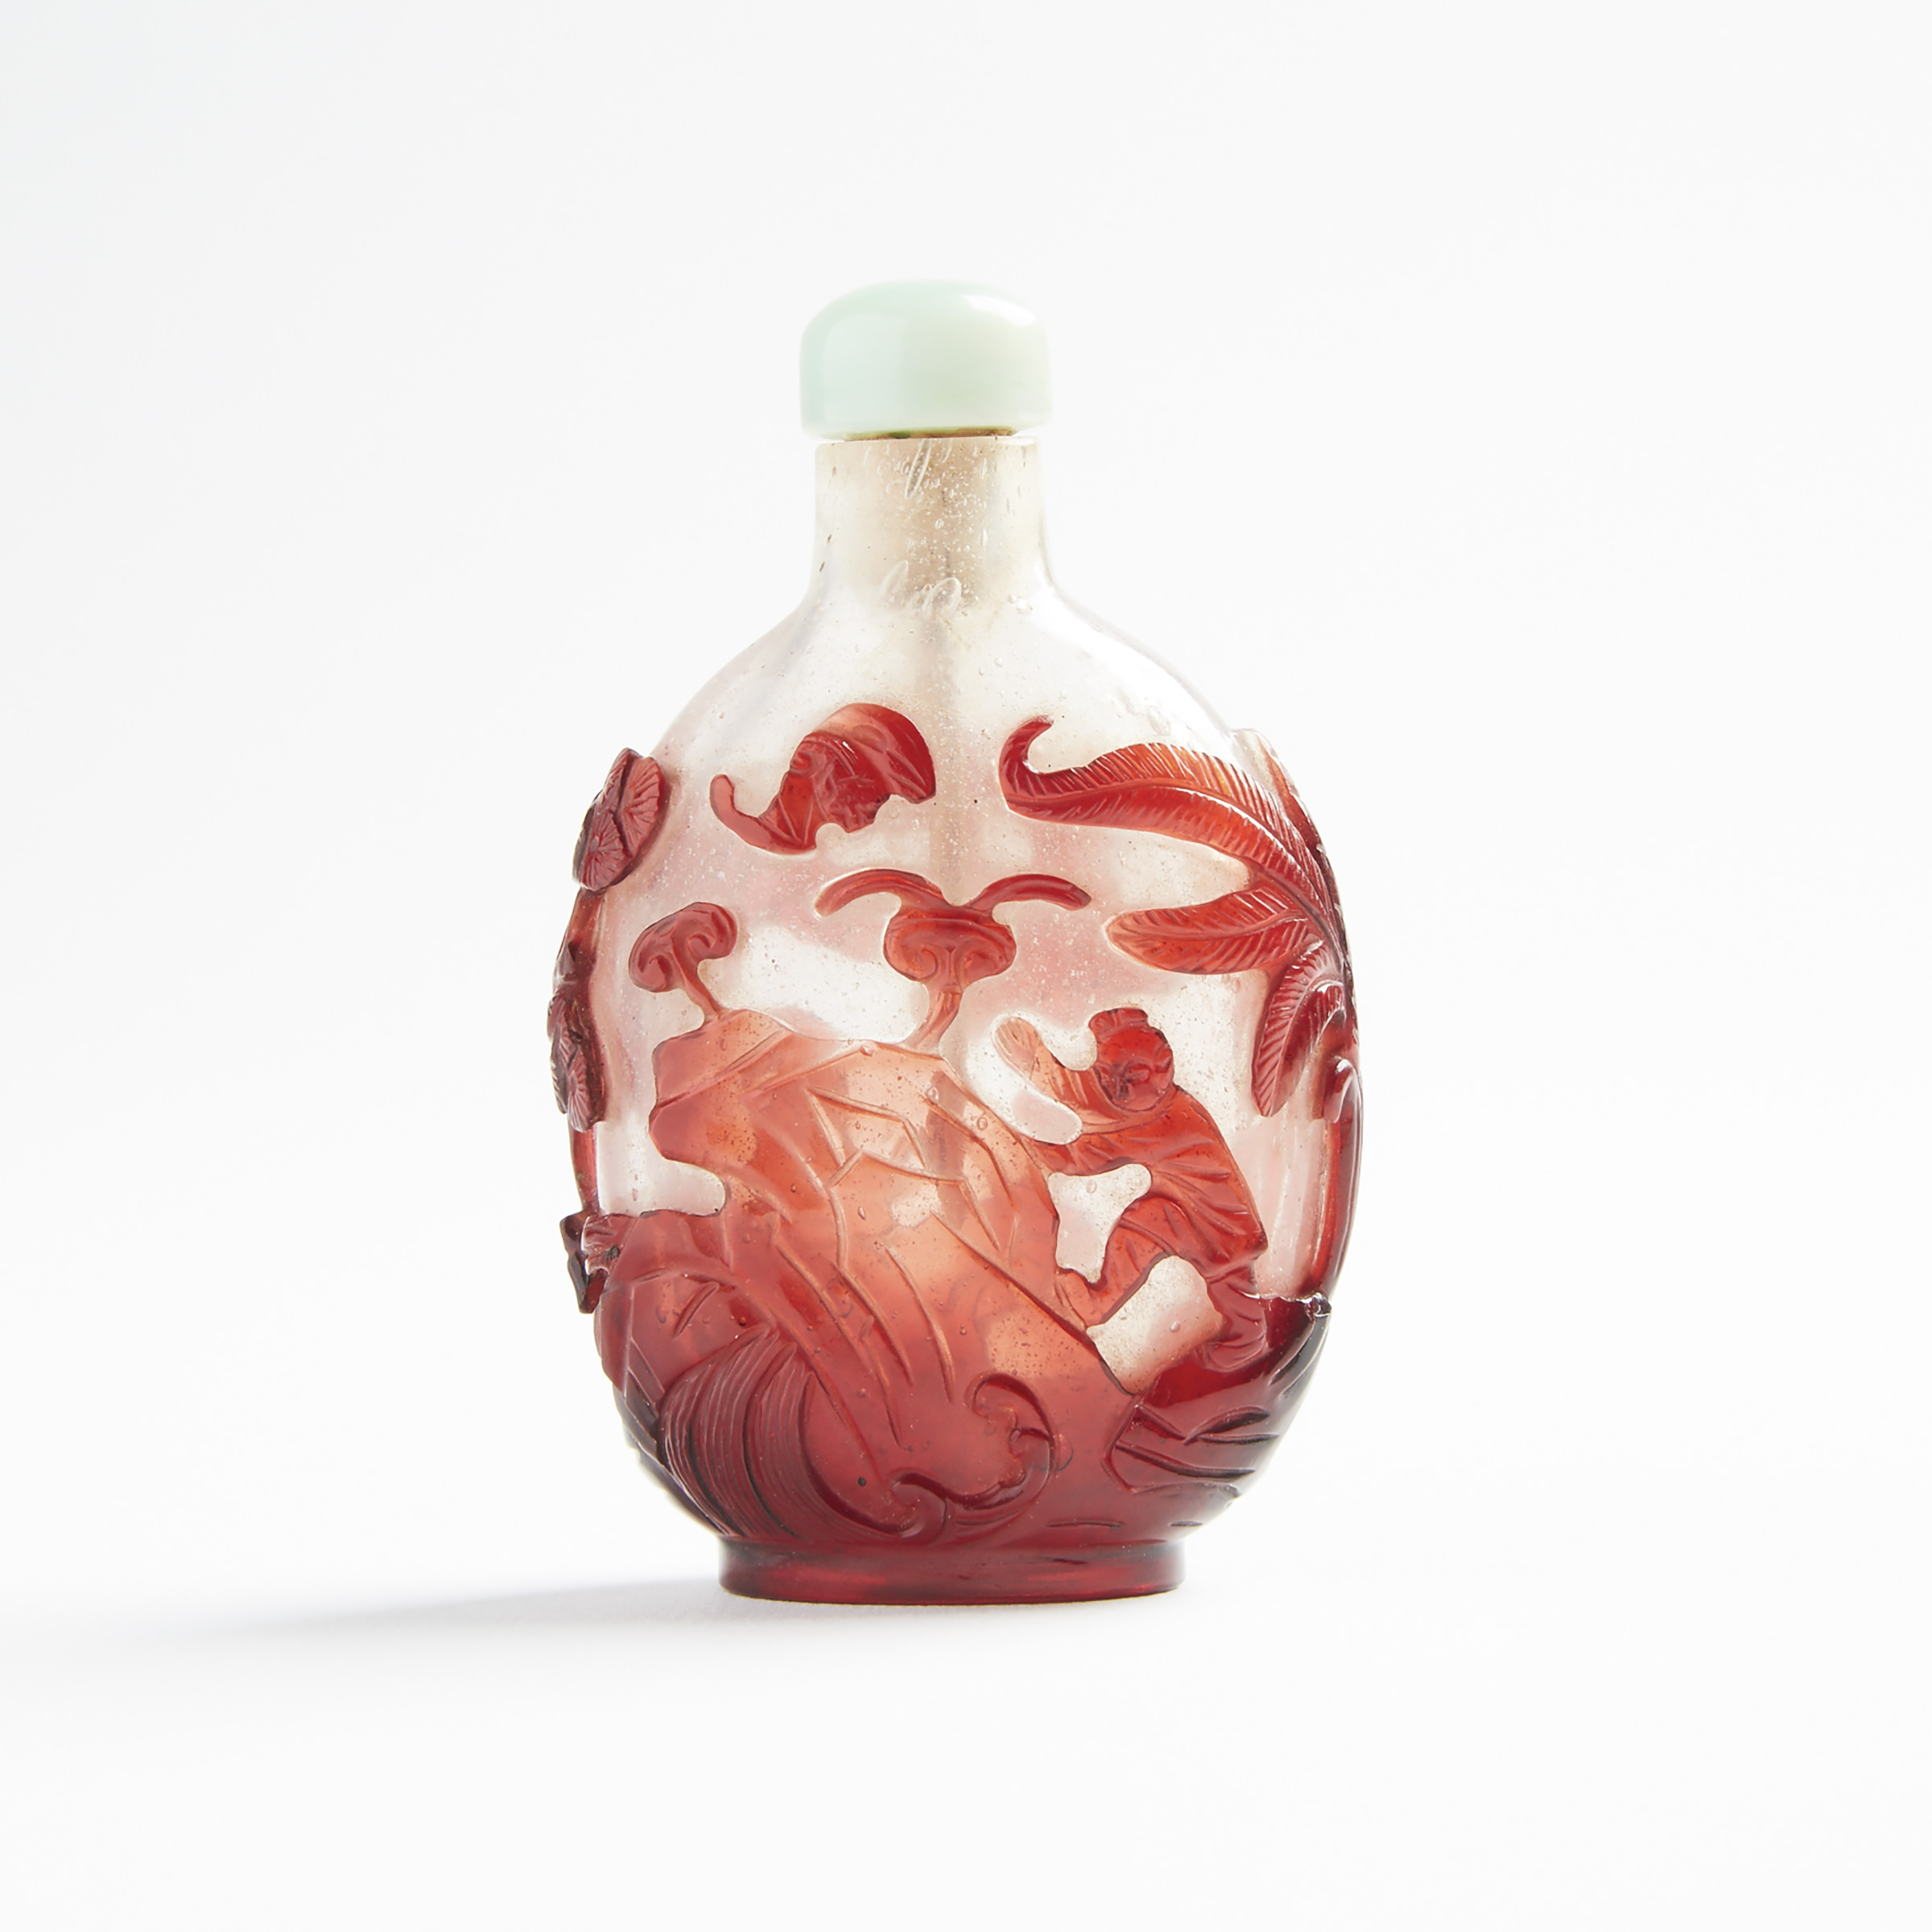 A Red Overlay 'Bat and Lingzhi' Glass Snuff Bottle, 19th Century